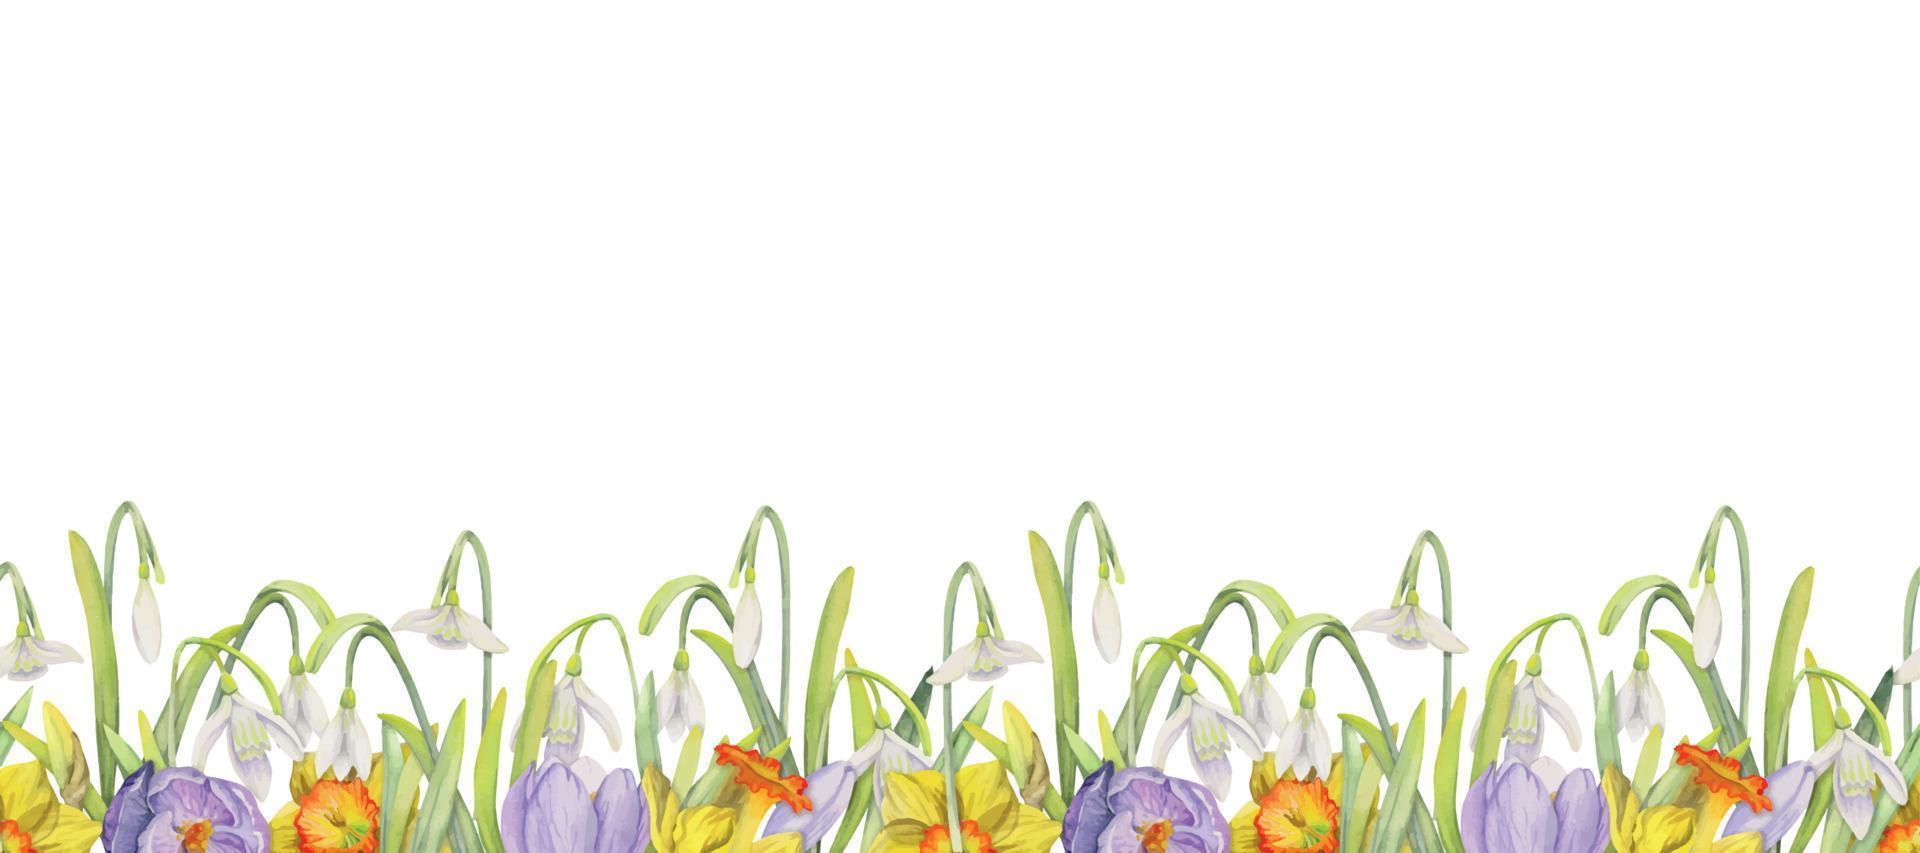 Watercolor hand drawn seamless border with spring flowers, daffodils, crocus, snowdrops. Isolated on white background. Design for invitations, wedding, greeting cards, wallpaper, print, textile vector